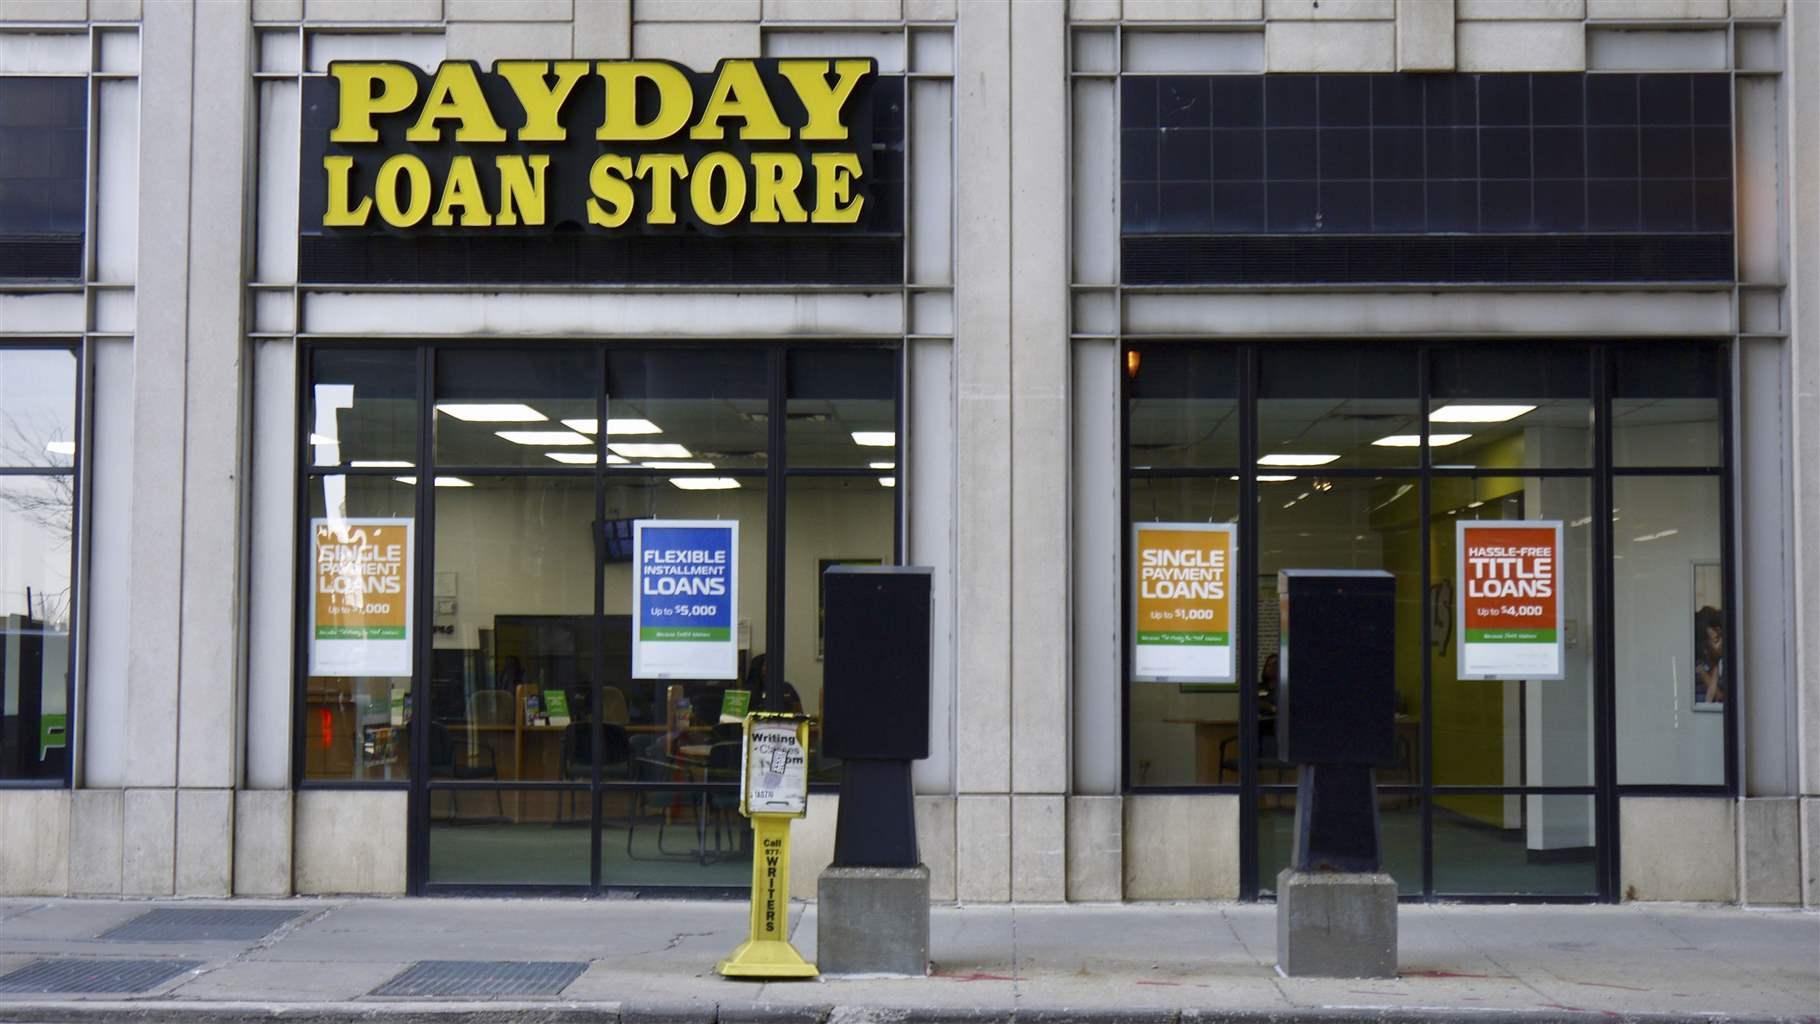 Exterior view of a Payday Loan Store in downtown Chicago, Illinois, 2019. (Photo by Interim Archives/Getty Images)